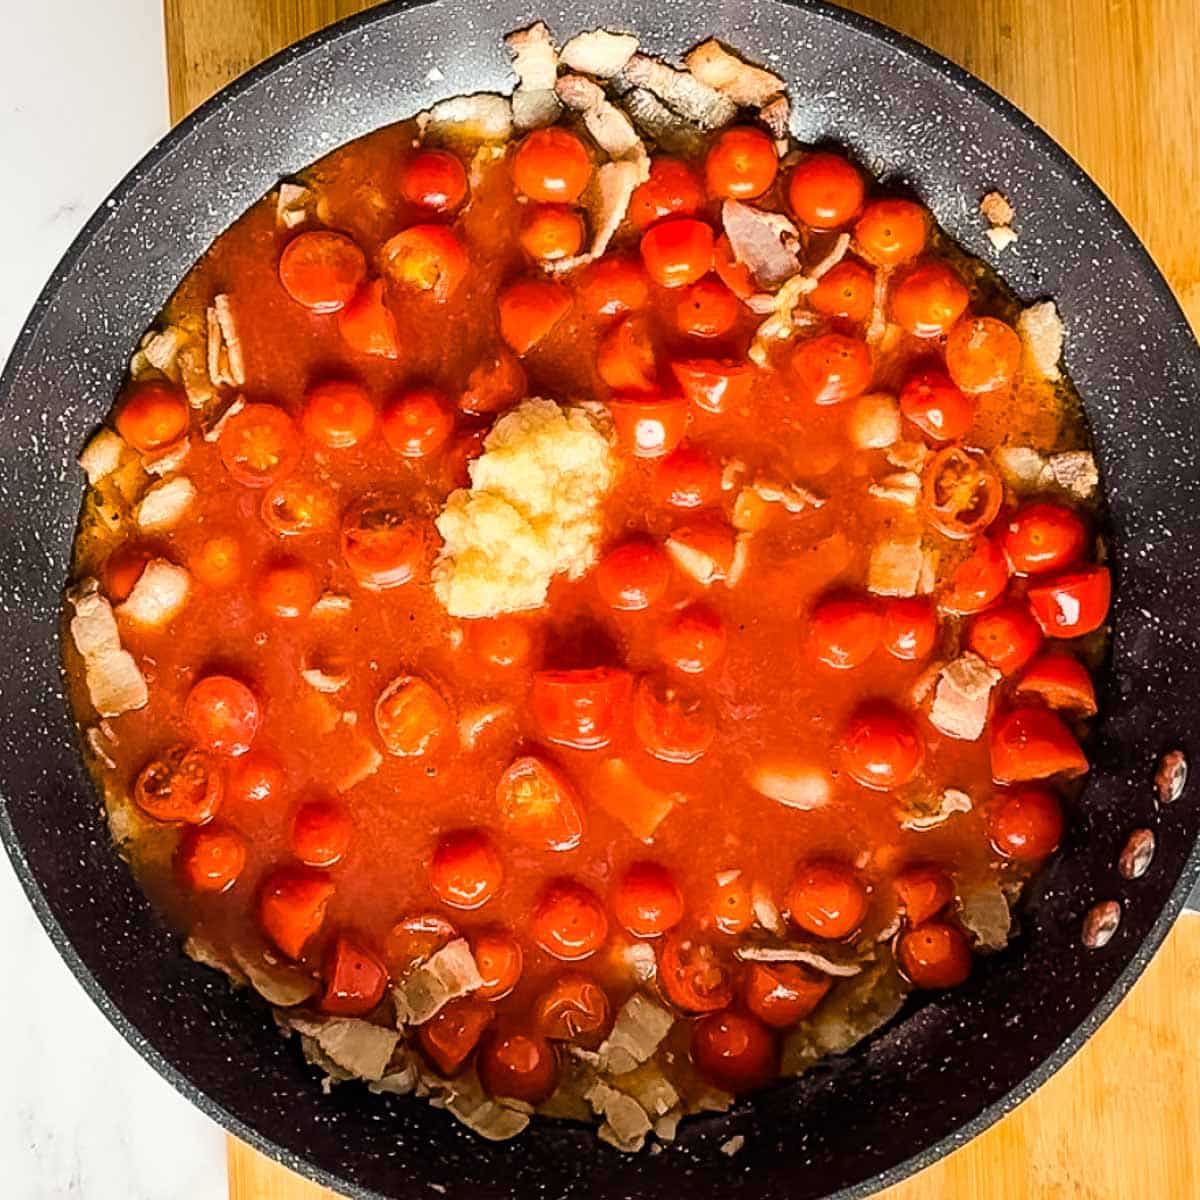 horseradish, tomato juice, and worcestershire sauce are added to cooking cherry tomatoes, bacon, and garlic in pan.